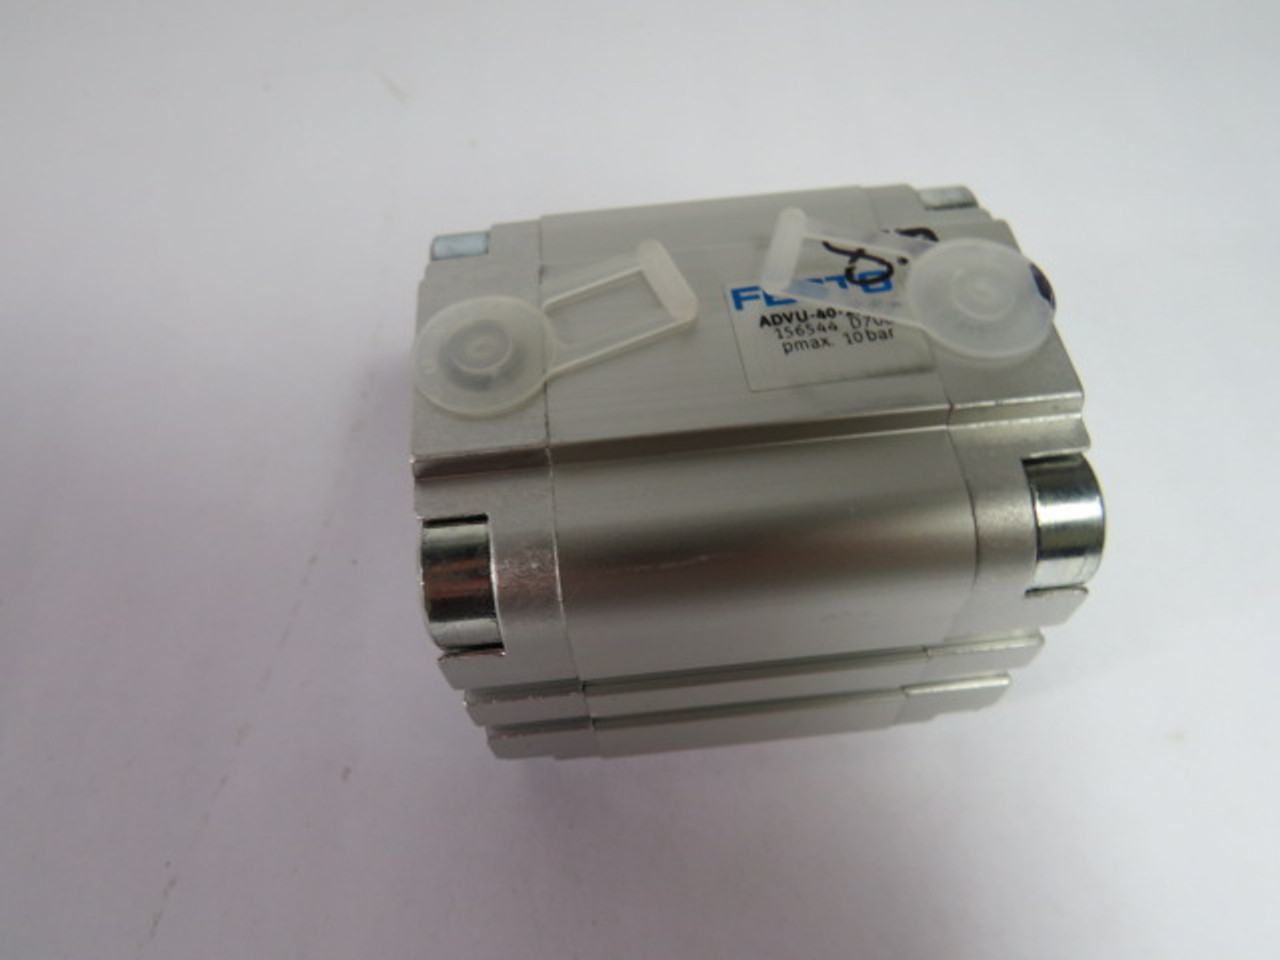 Festo ADVU-40-25-P-A Compact Pneumatic Cylinder 40mm Bore 25mm Stroke USED